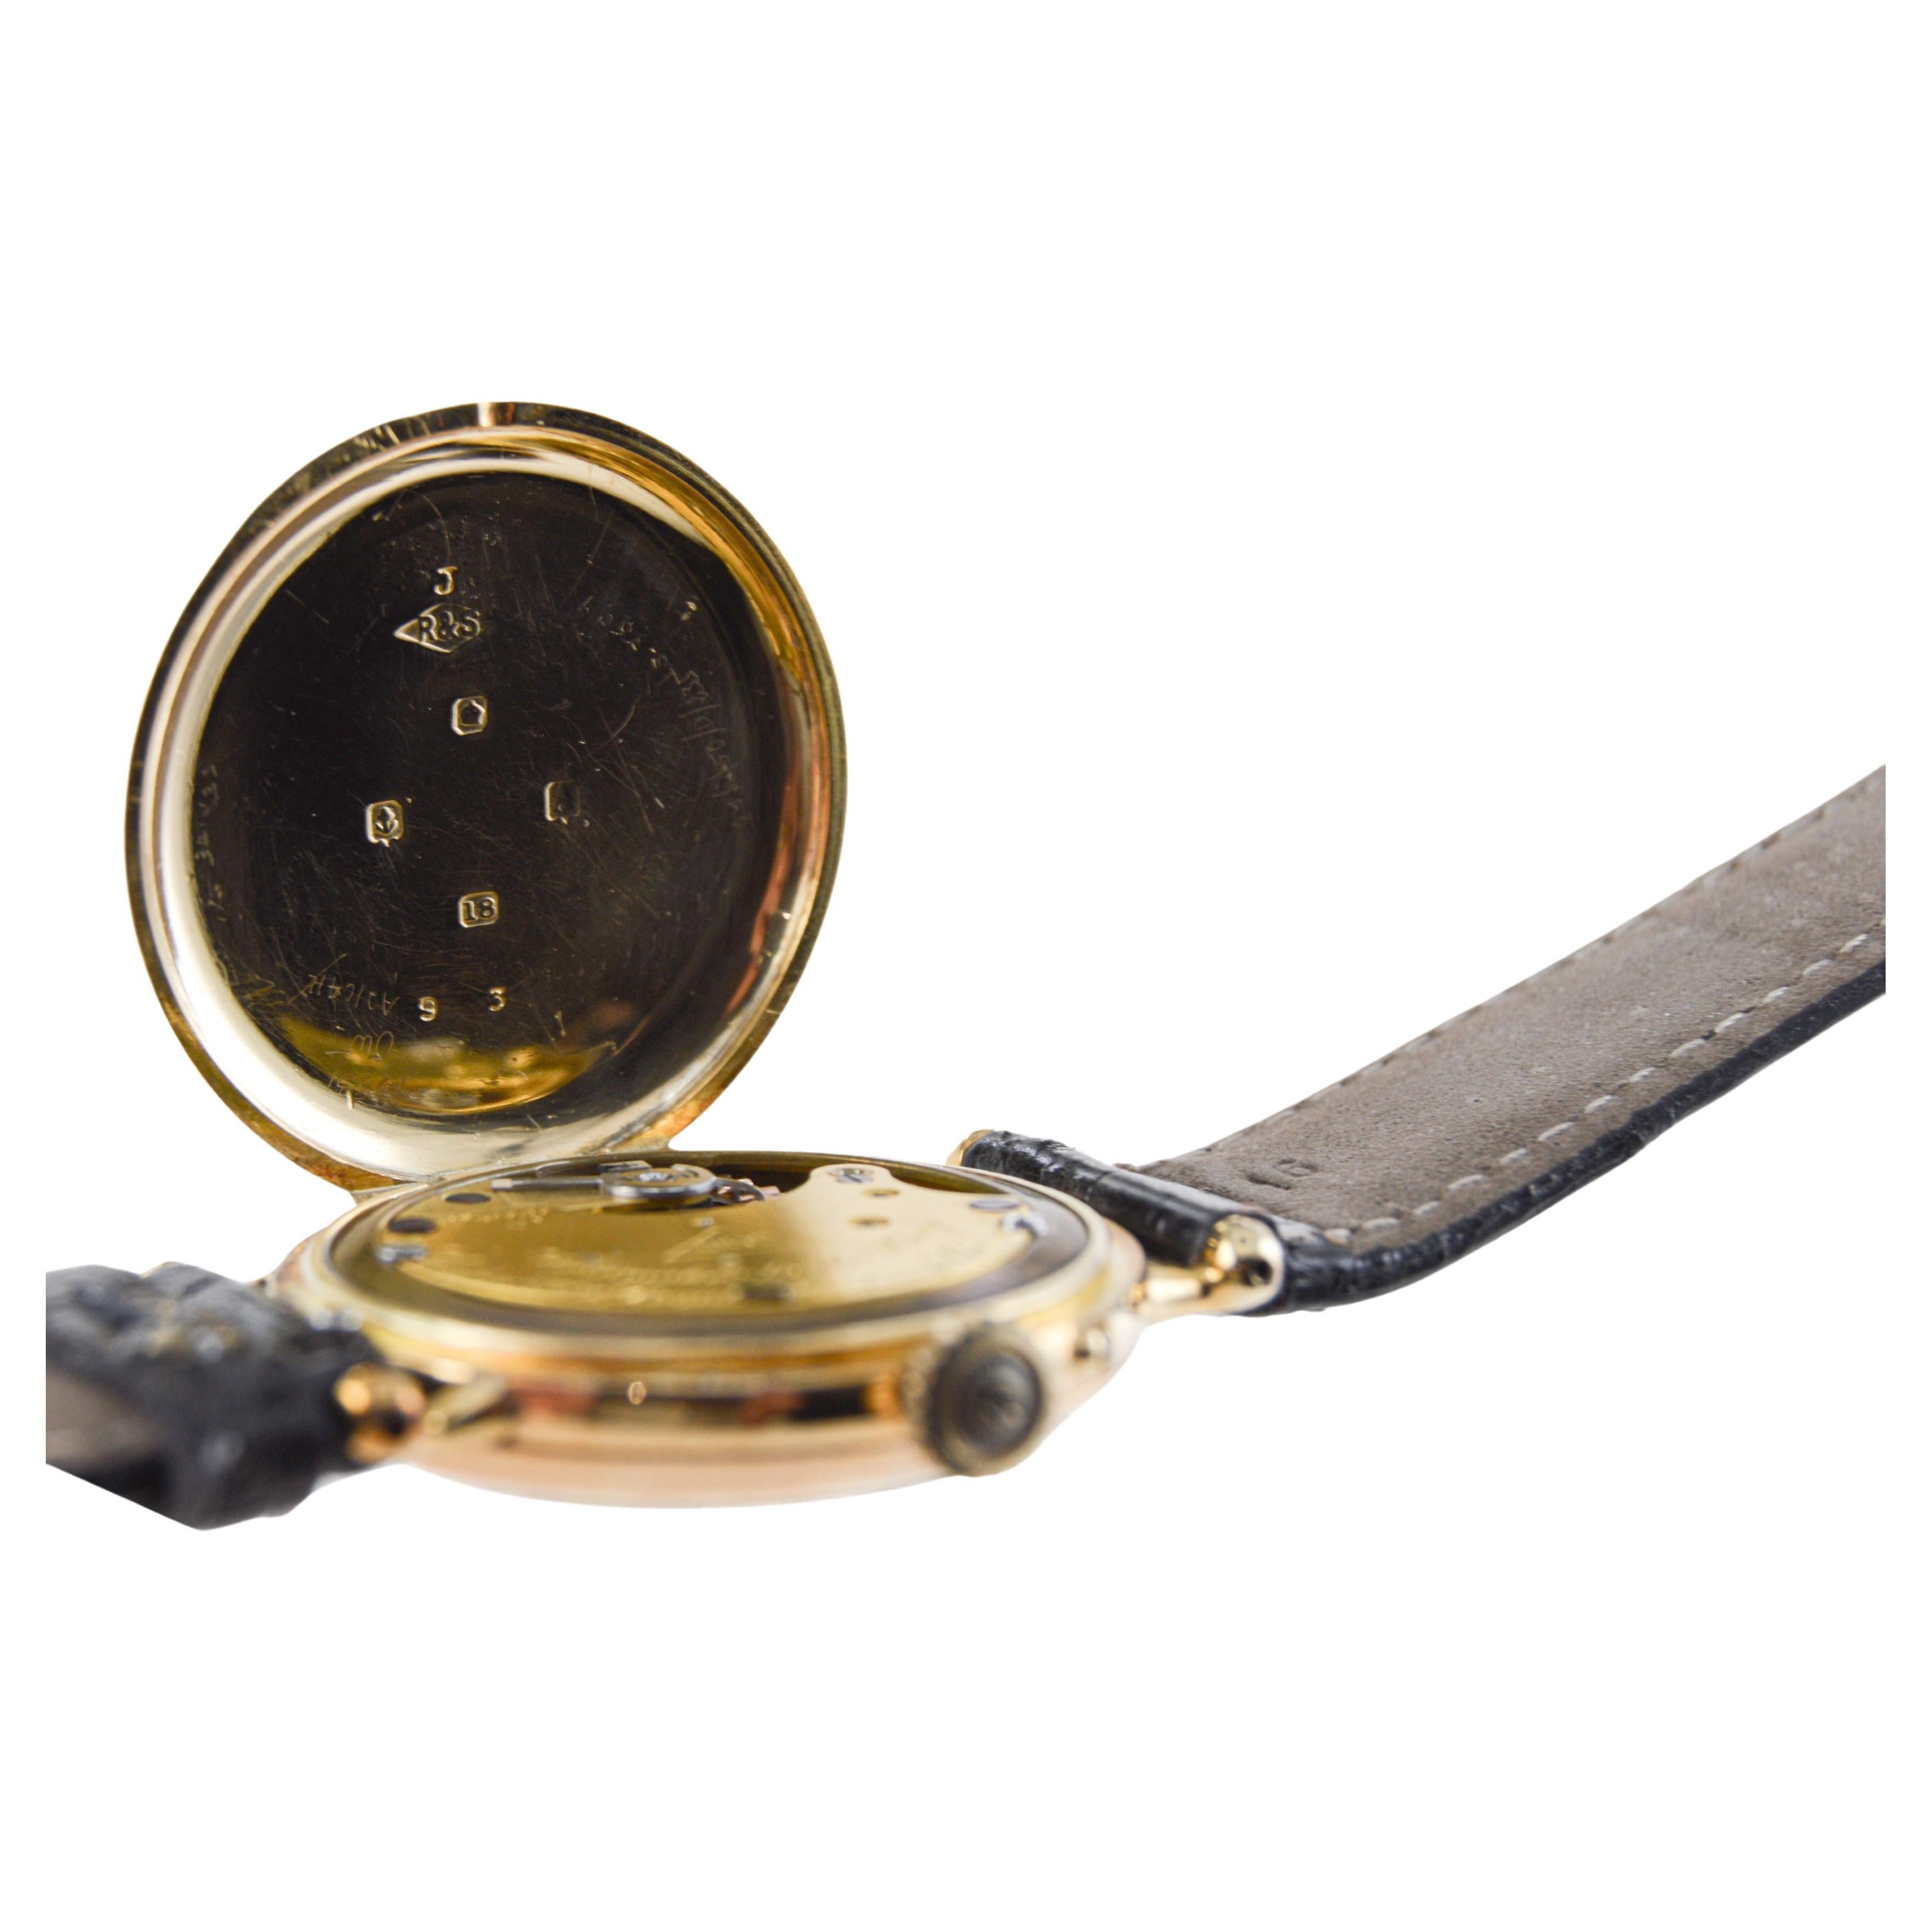 Dent London 18kt. Gold Wrist Watch Made by Legendary Chronometer Maker from 1926 For Sale 2